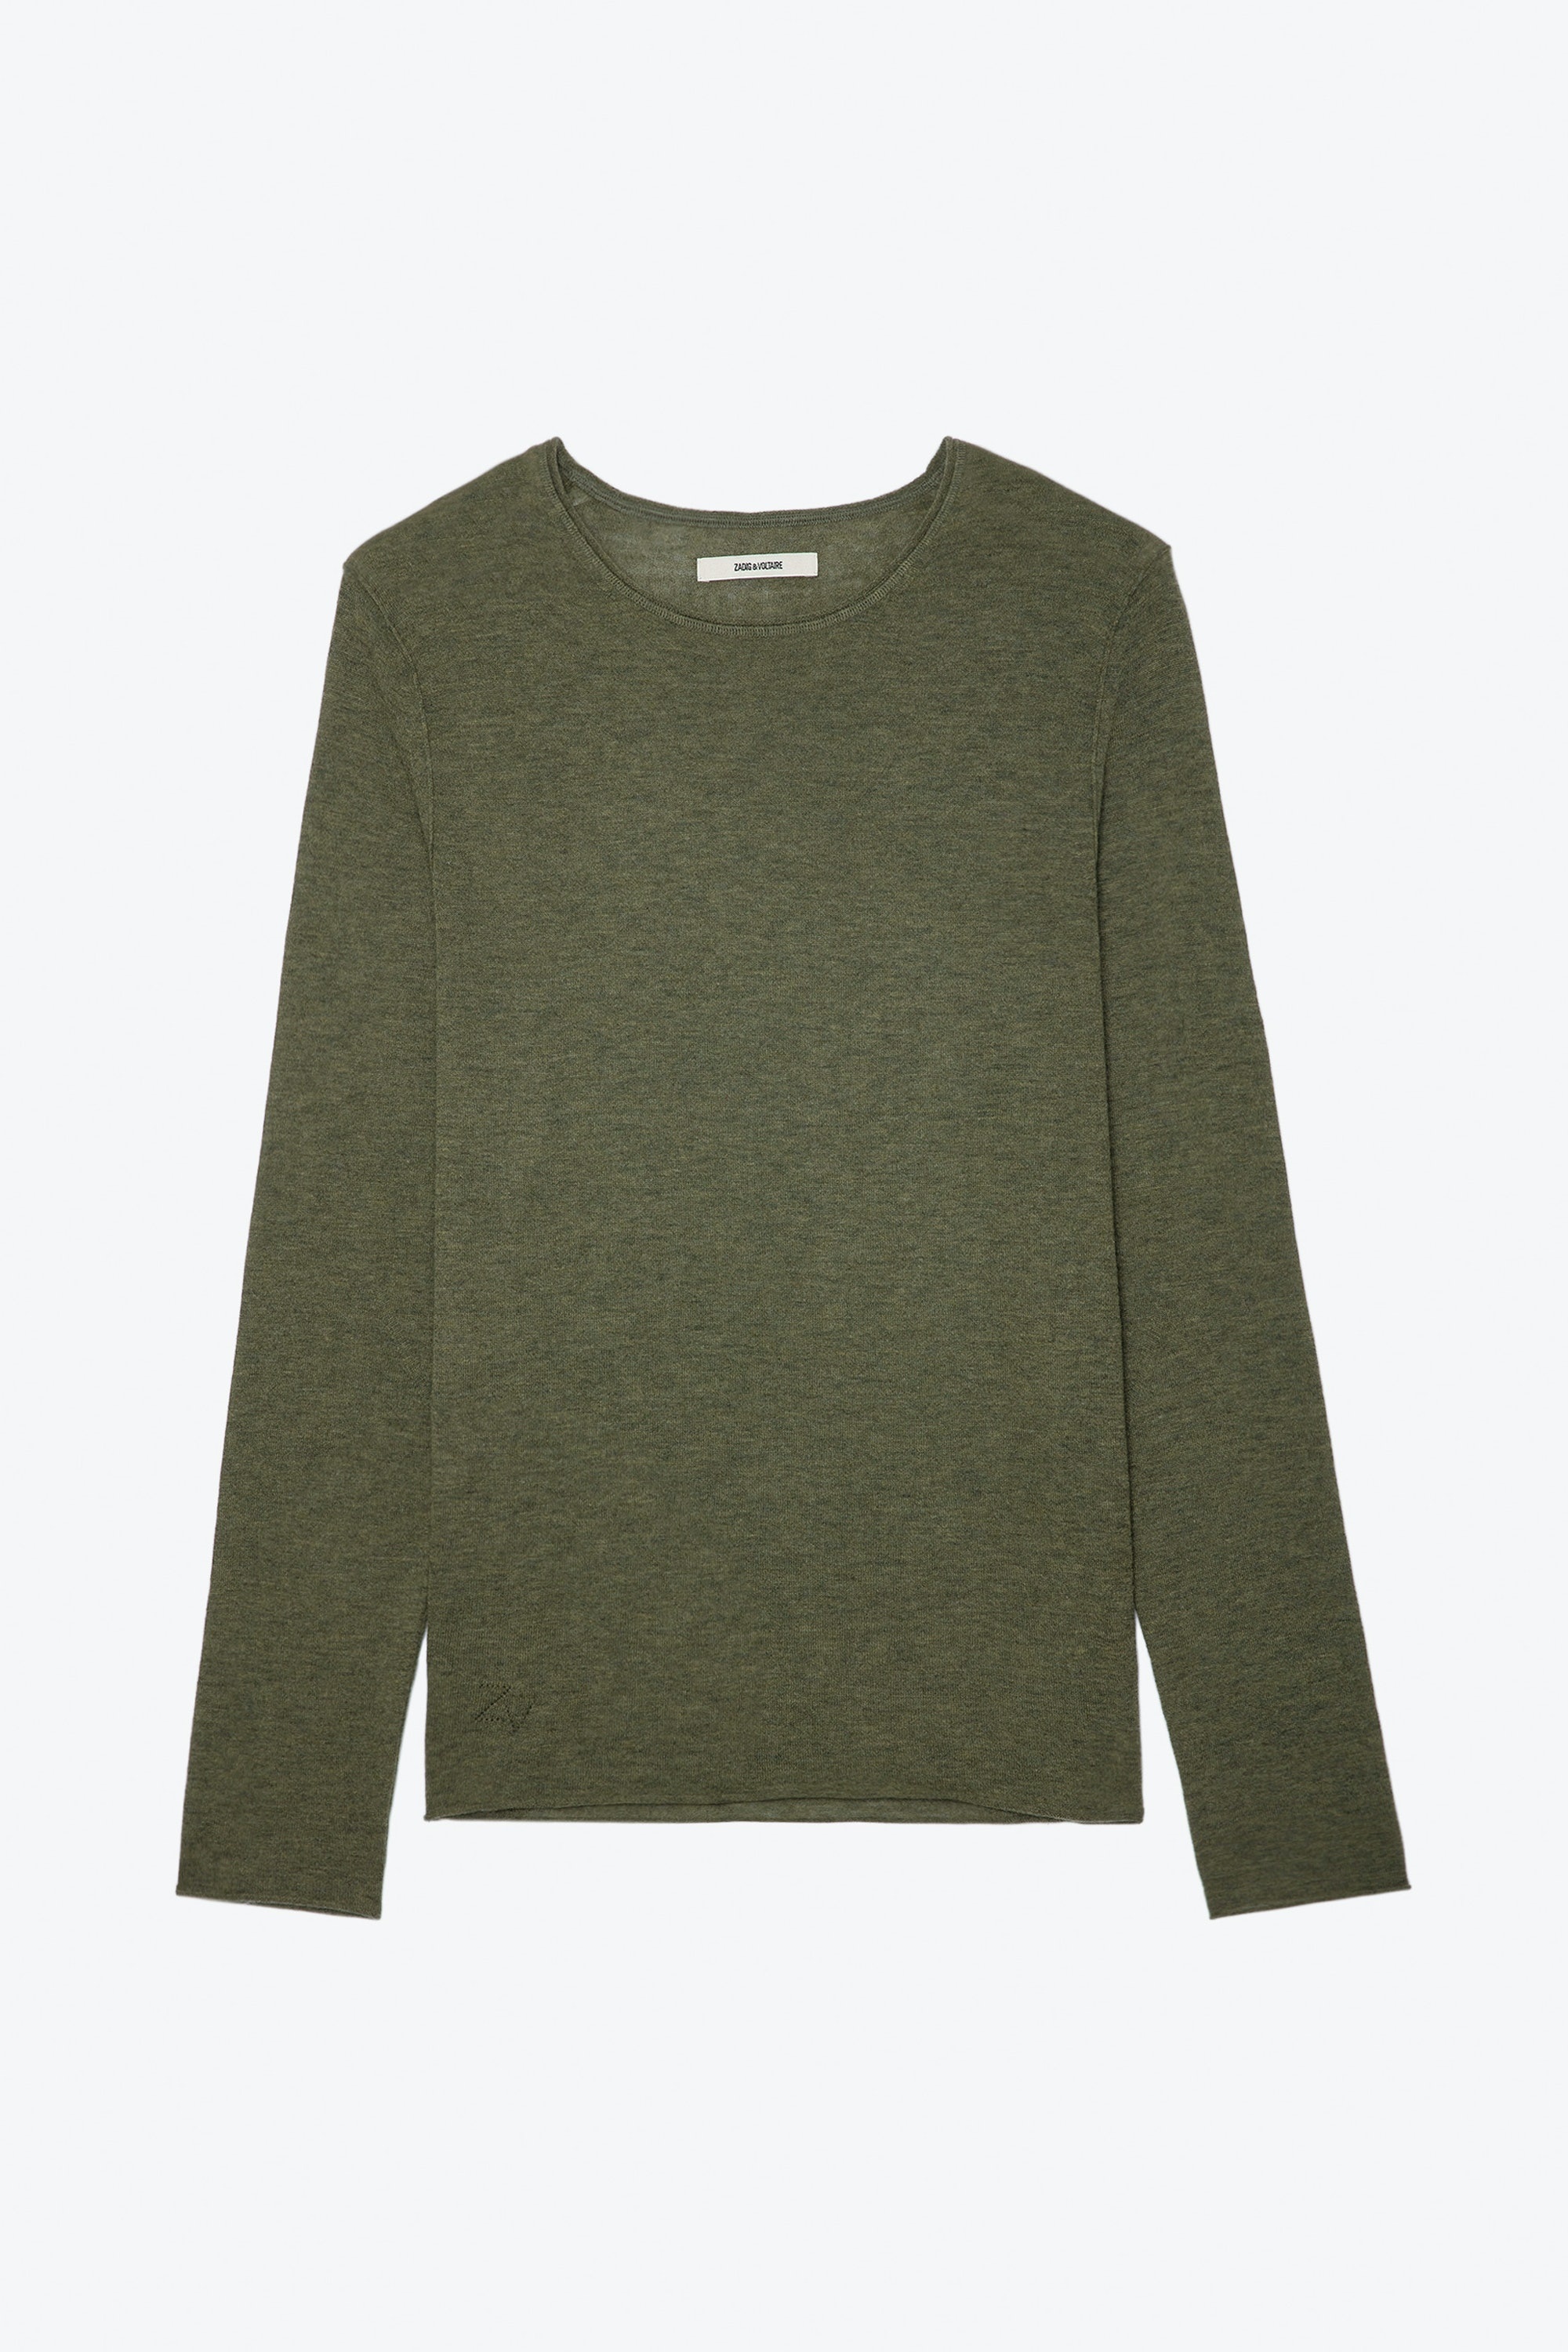 Teiss Cashmere Sweater - 1